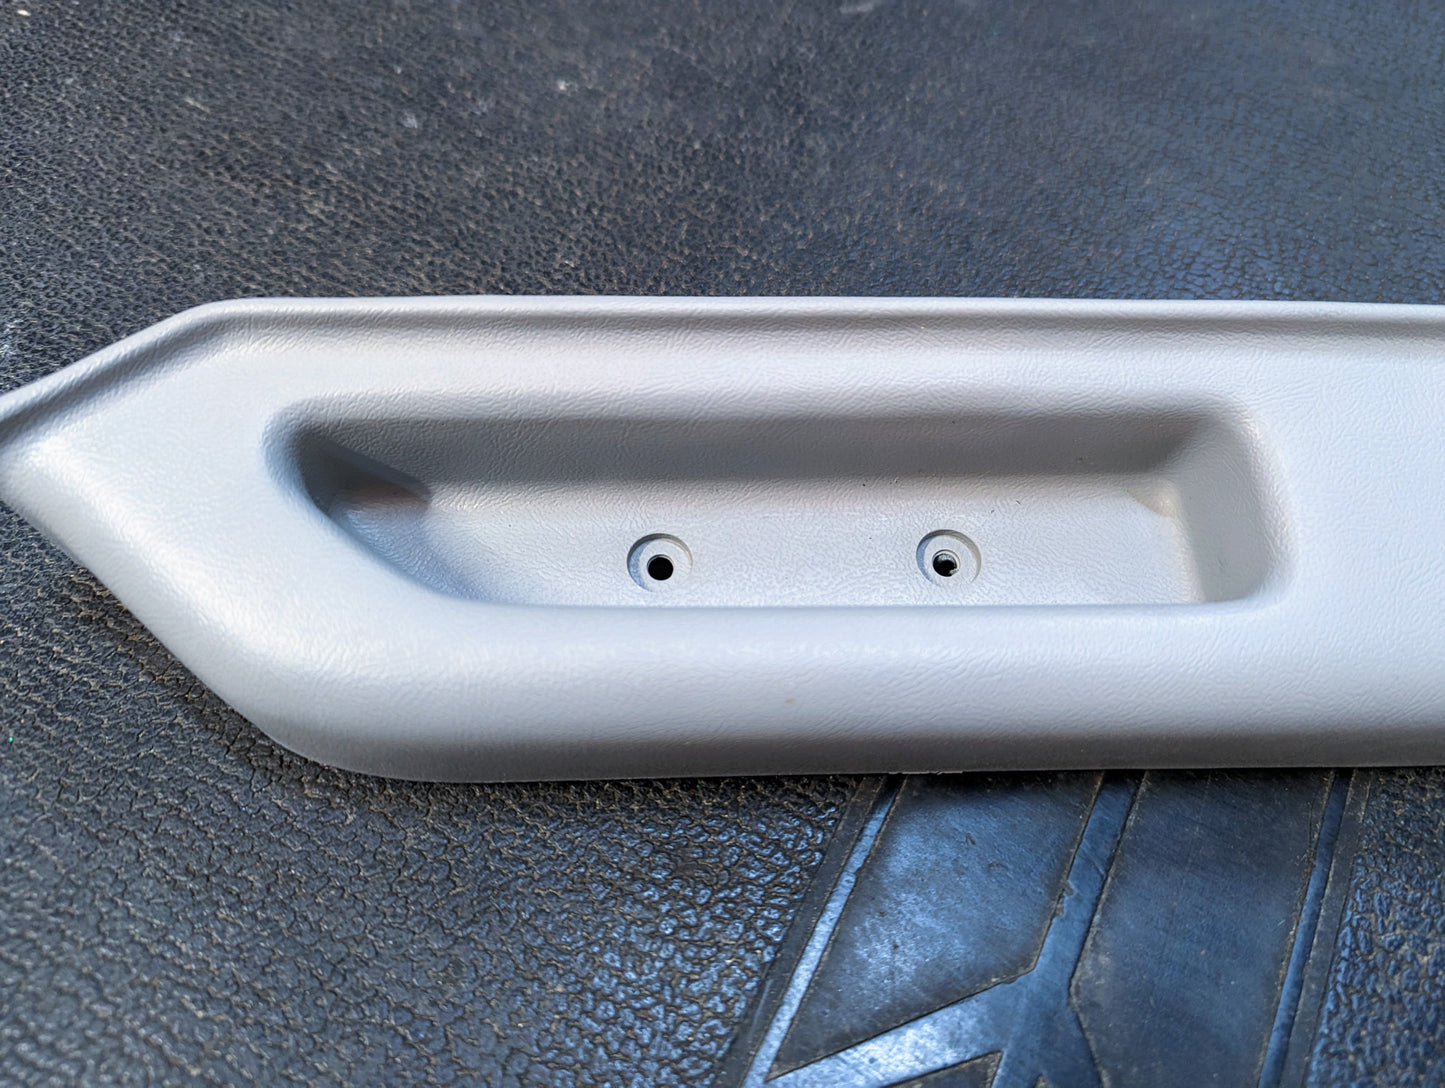 NOS Passenger Door Panel Armrest Handle in Gray for 1986 - 1993 Chevy S10, Blazer, and more